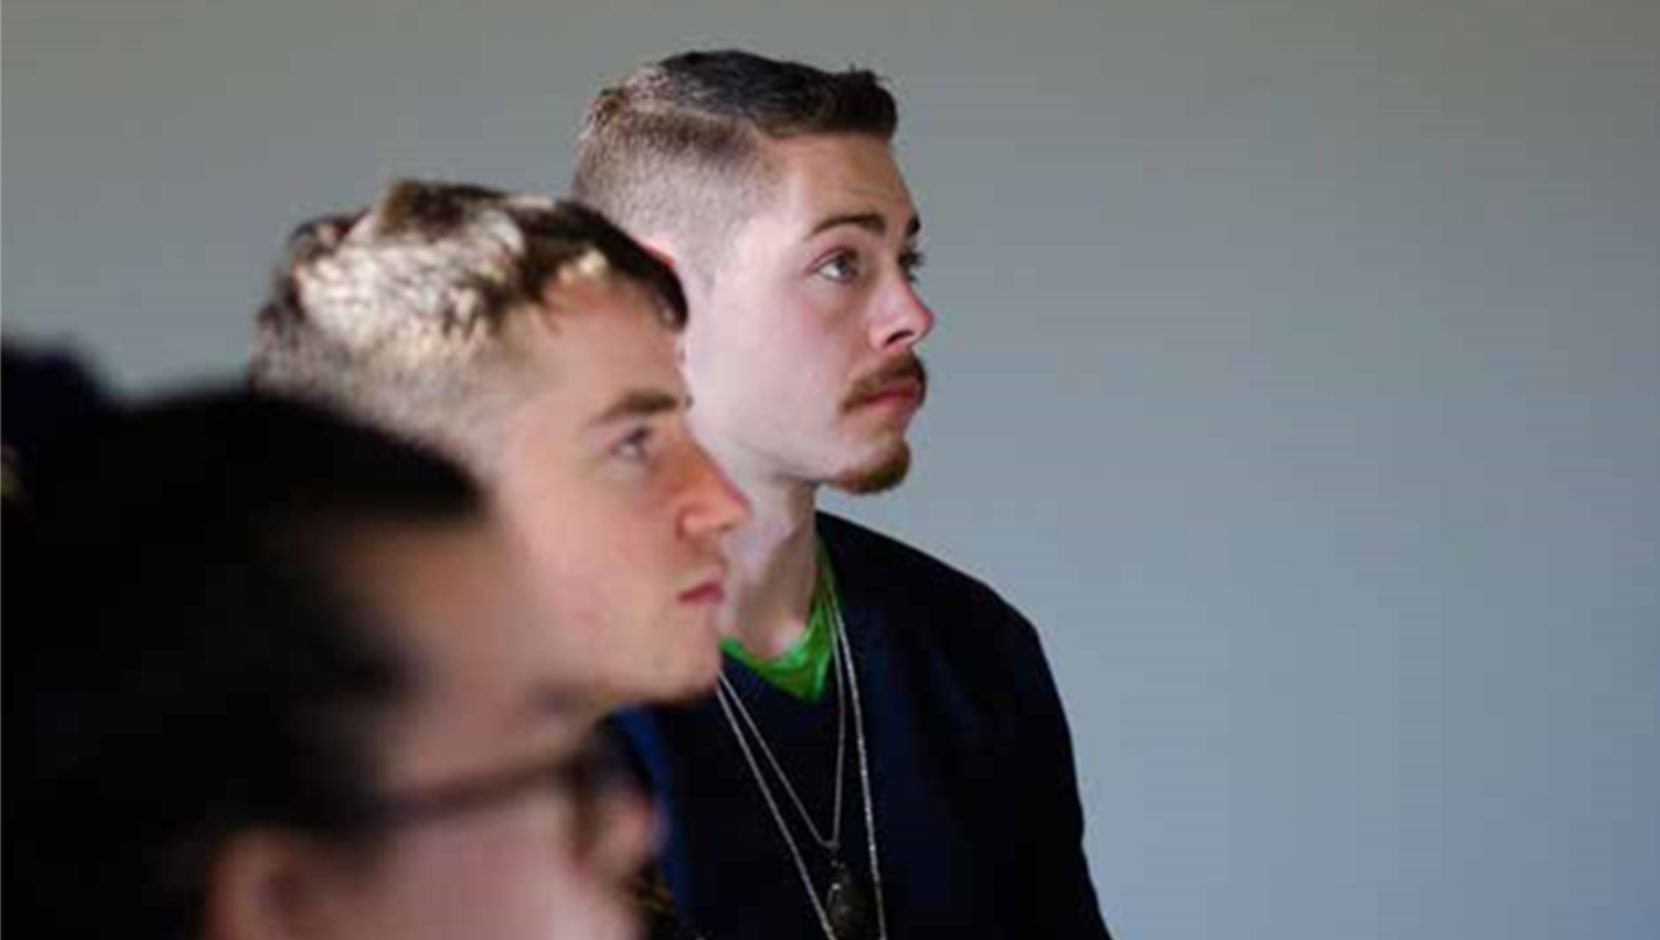 Image of three white employees listening to someone speak and all looking forward. Photo is taken from the side.